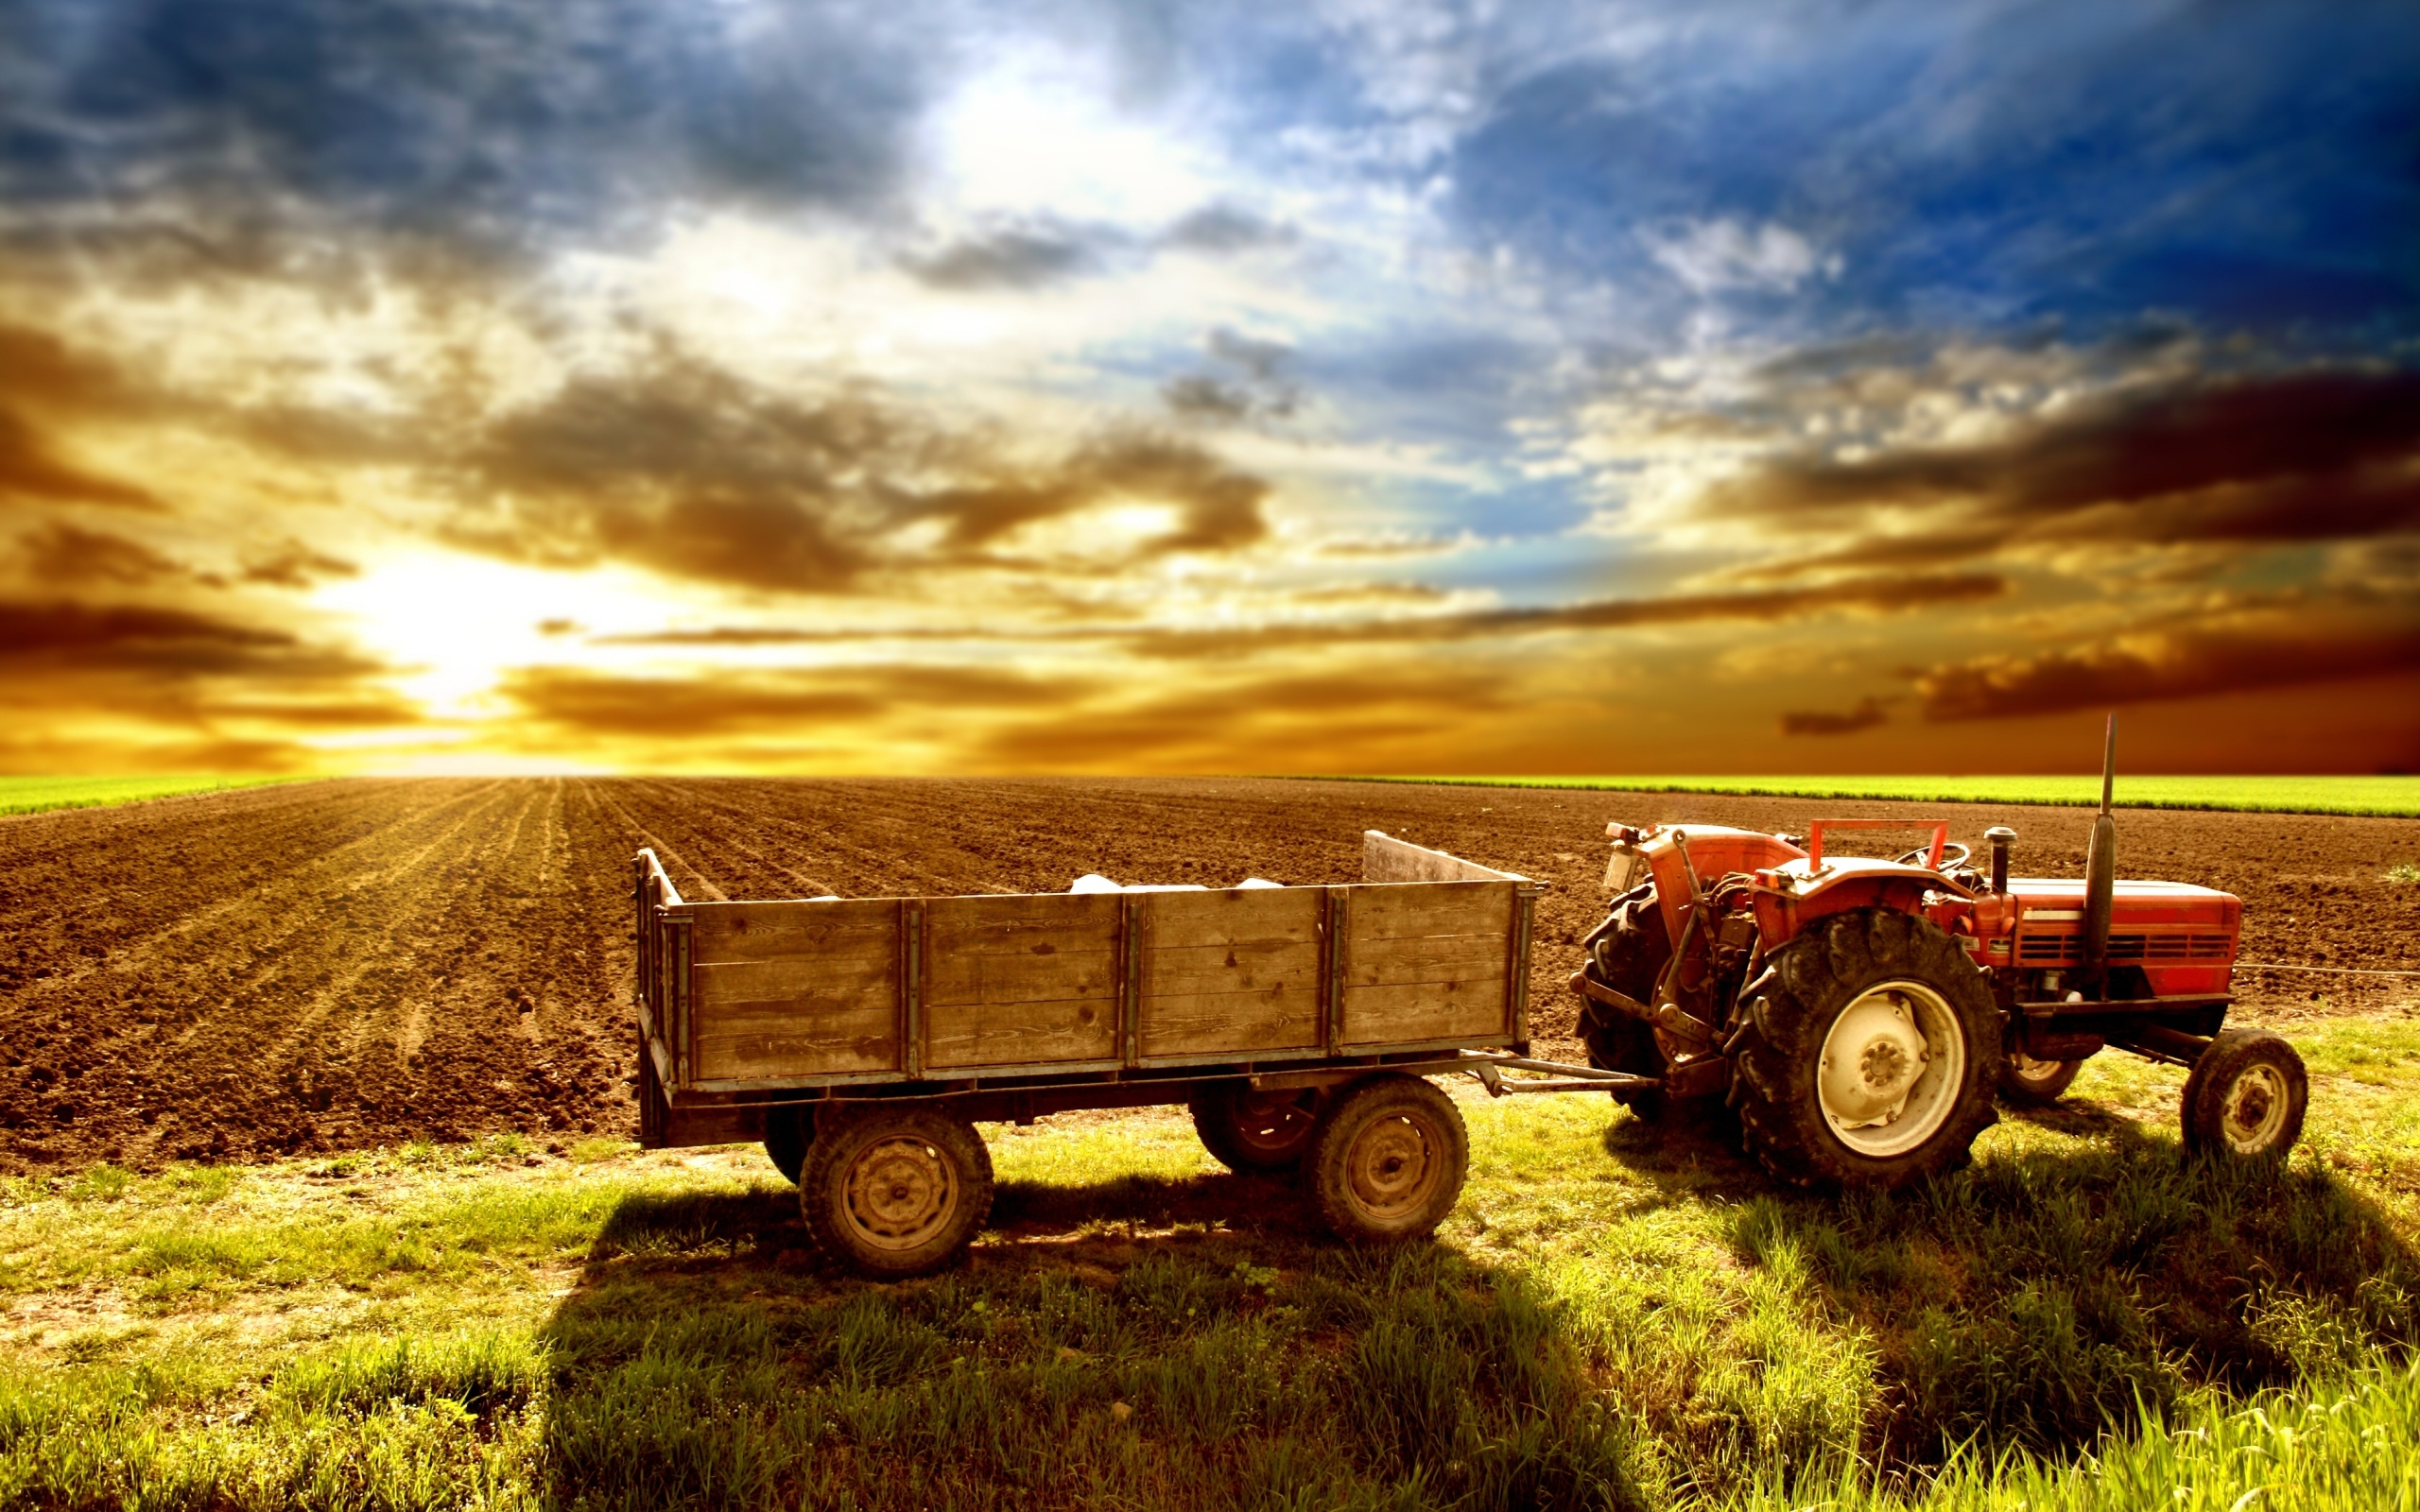 Tractor Background